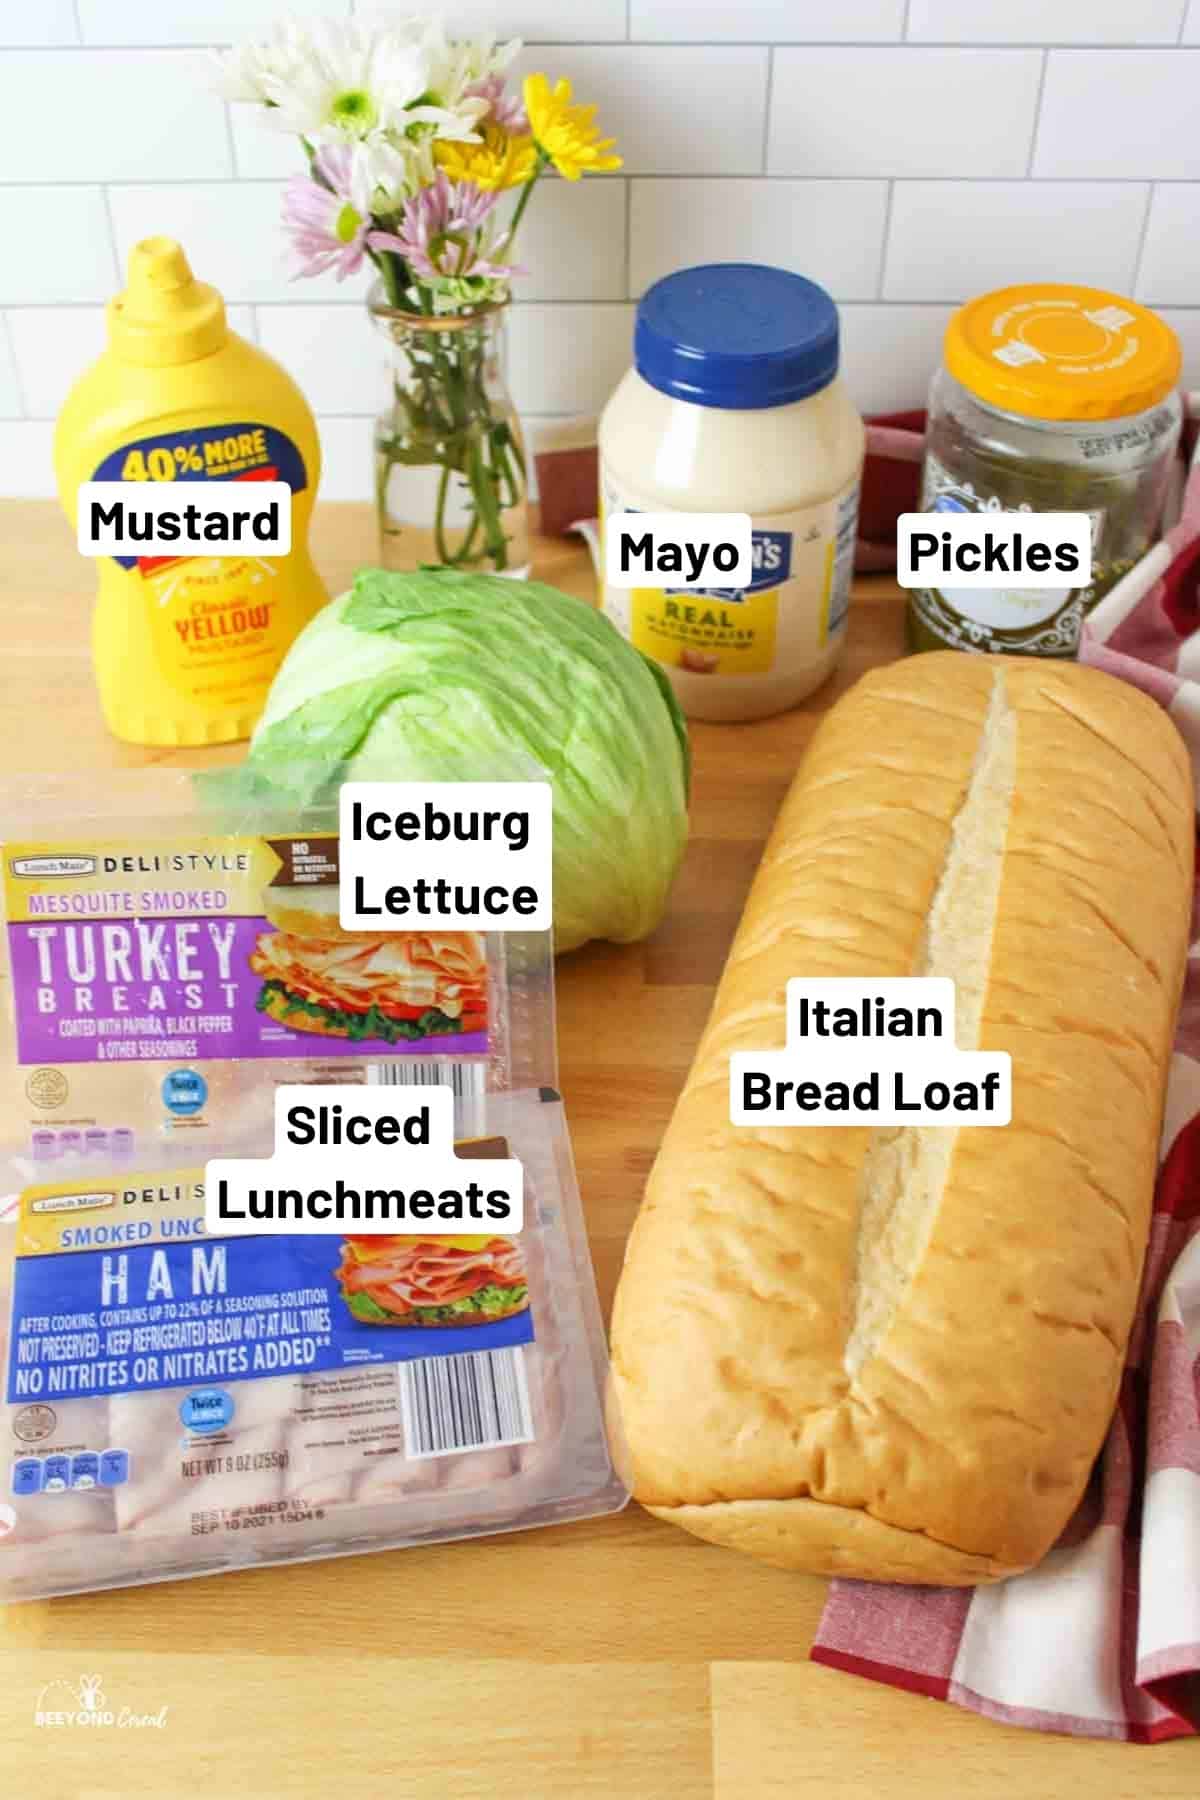 ingredients needed to make a giant sub sandwich at home.